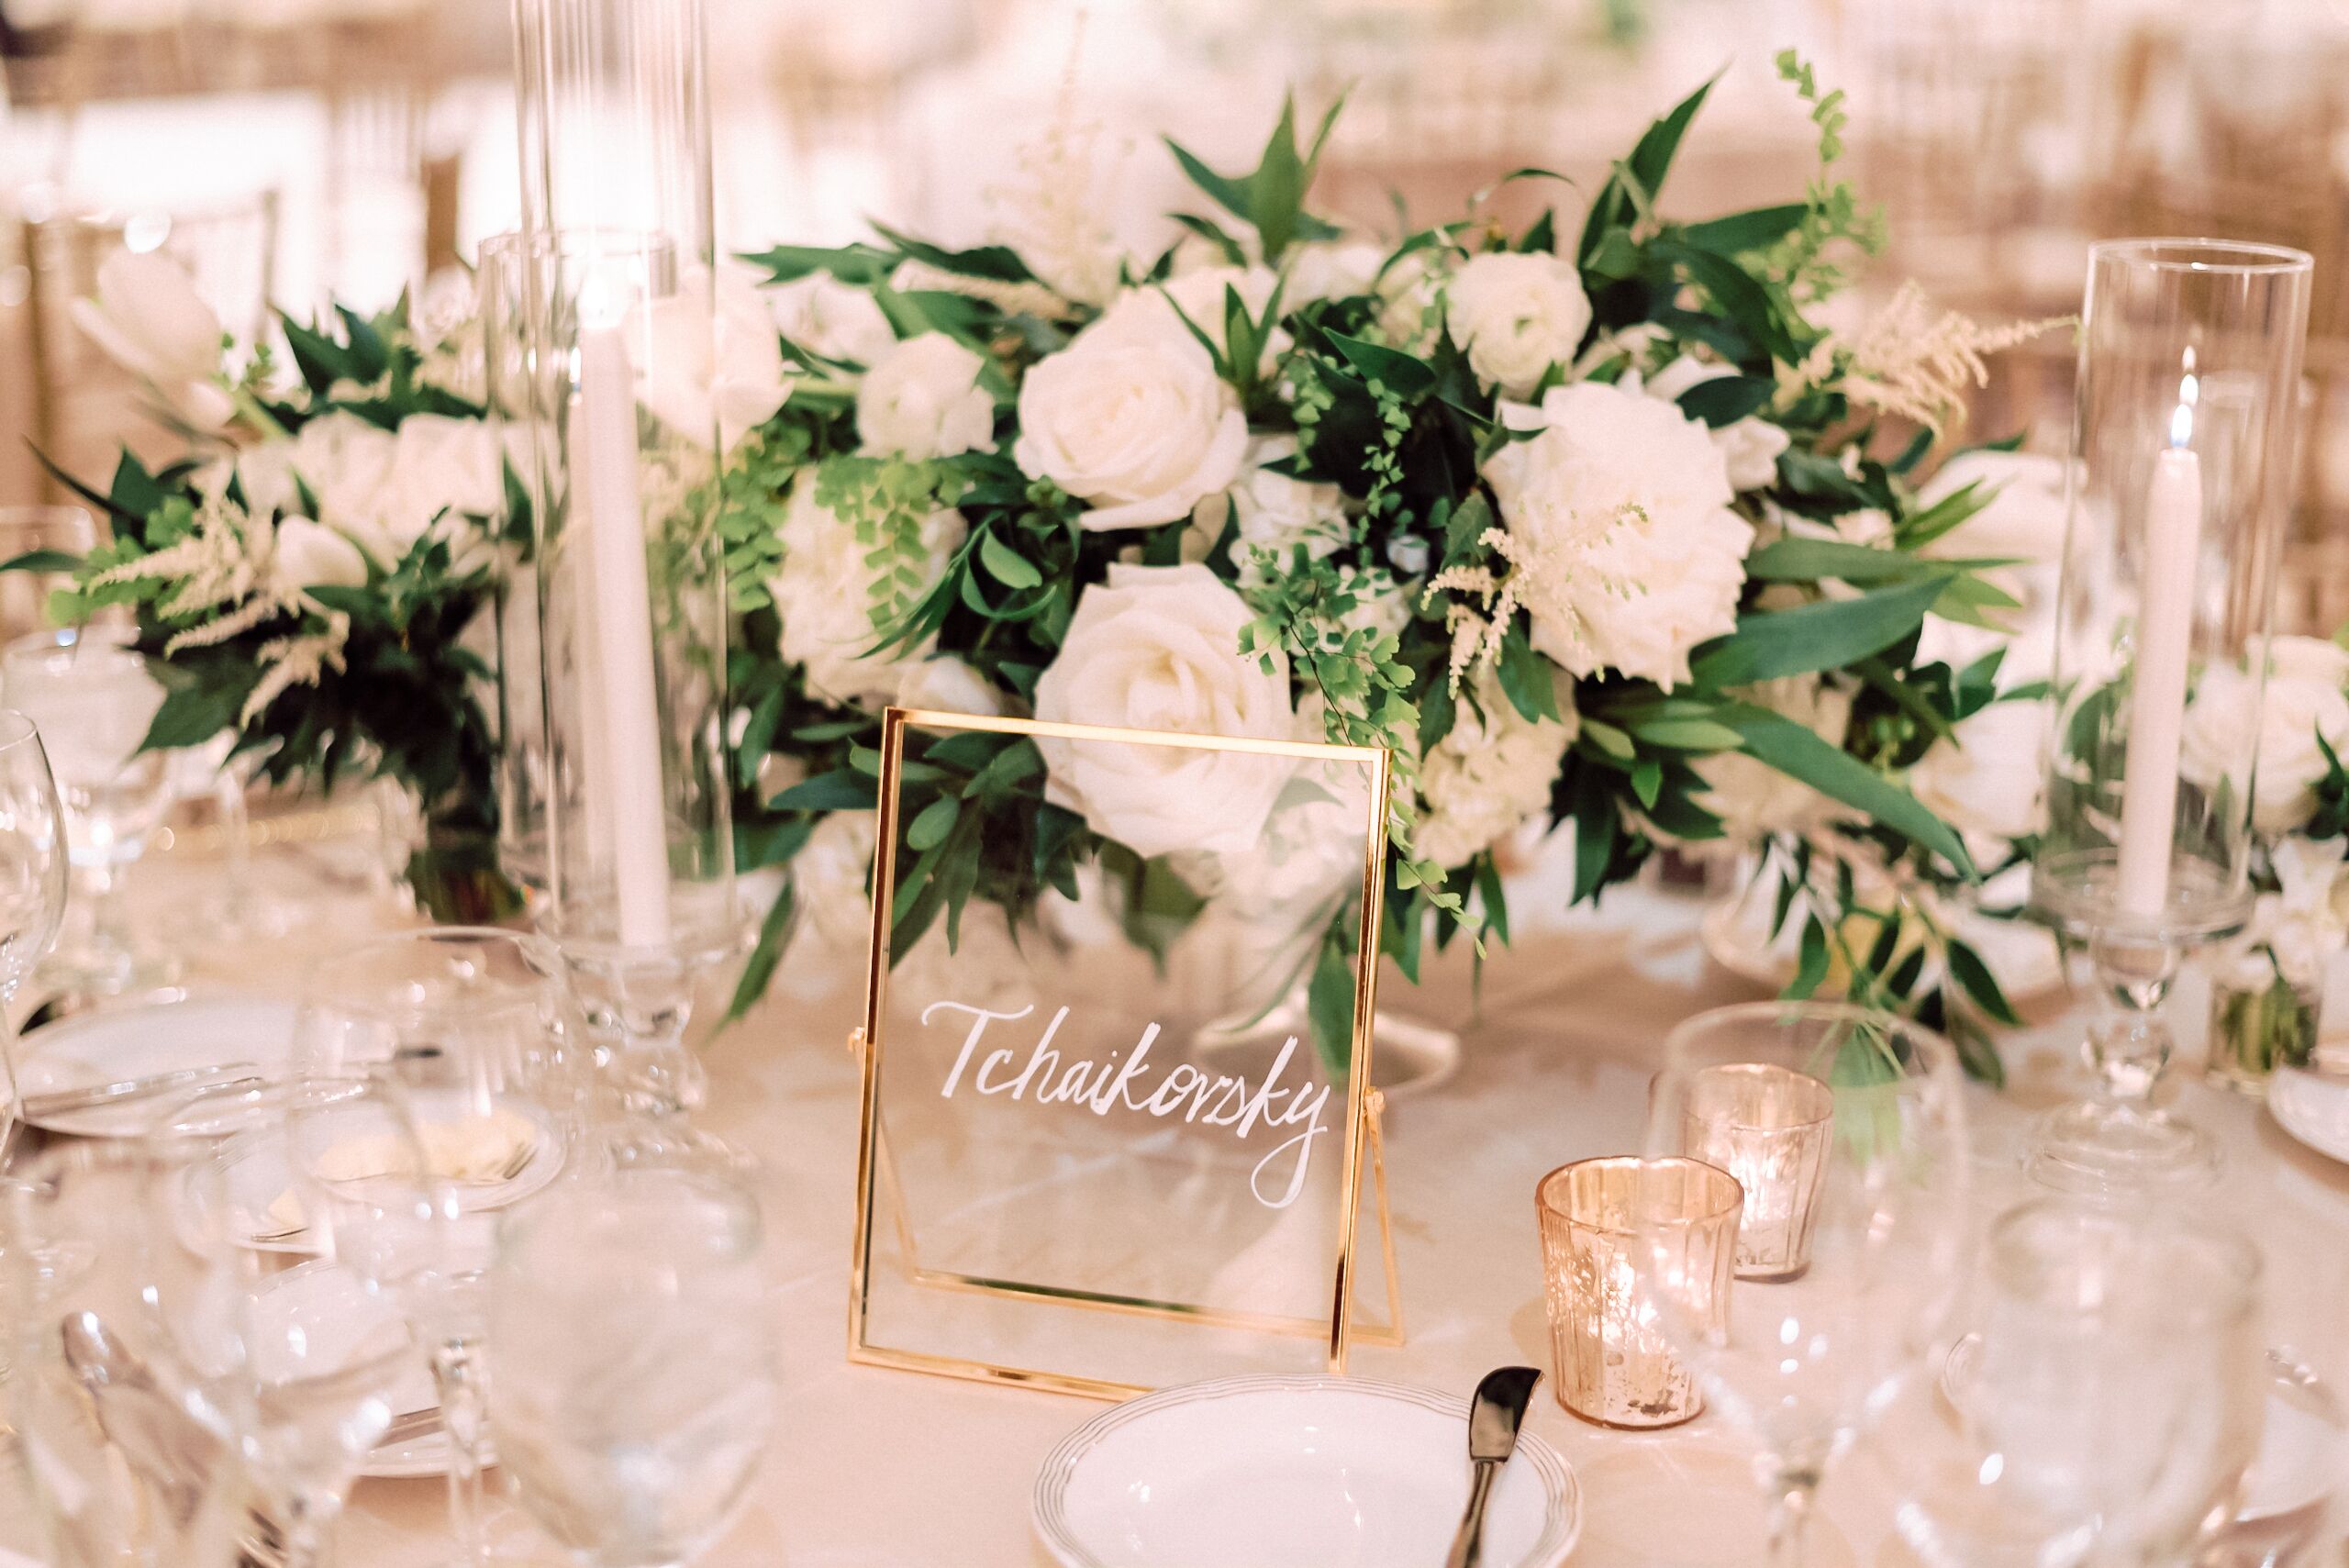 Personalized Gold-Framed Table Number Named for Classical Composer